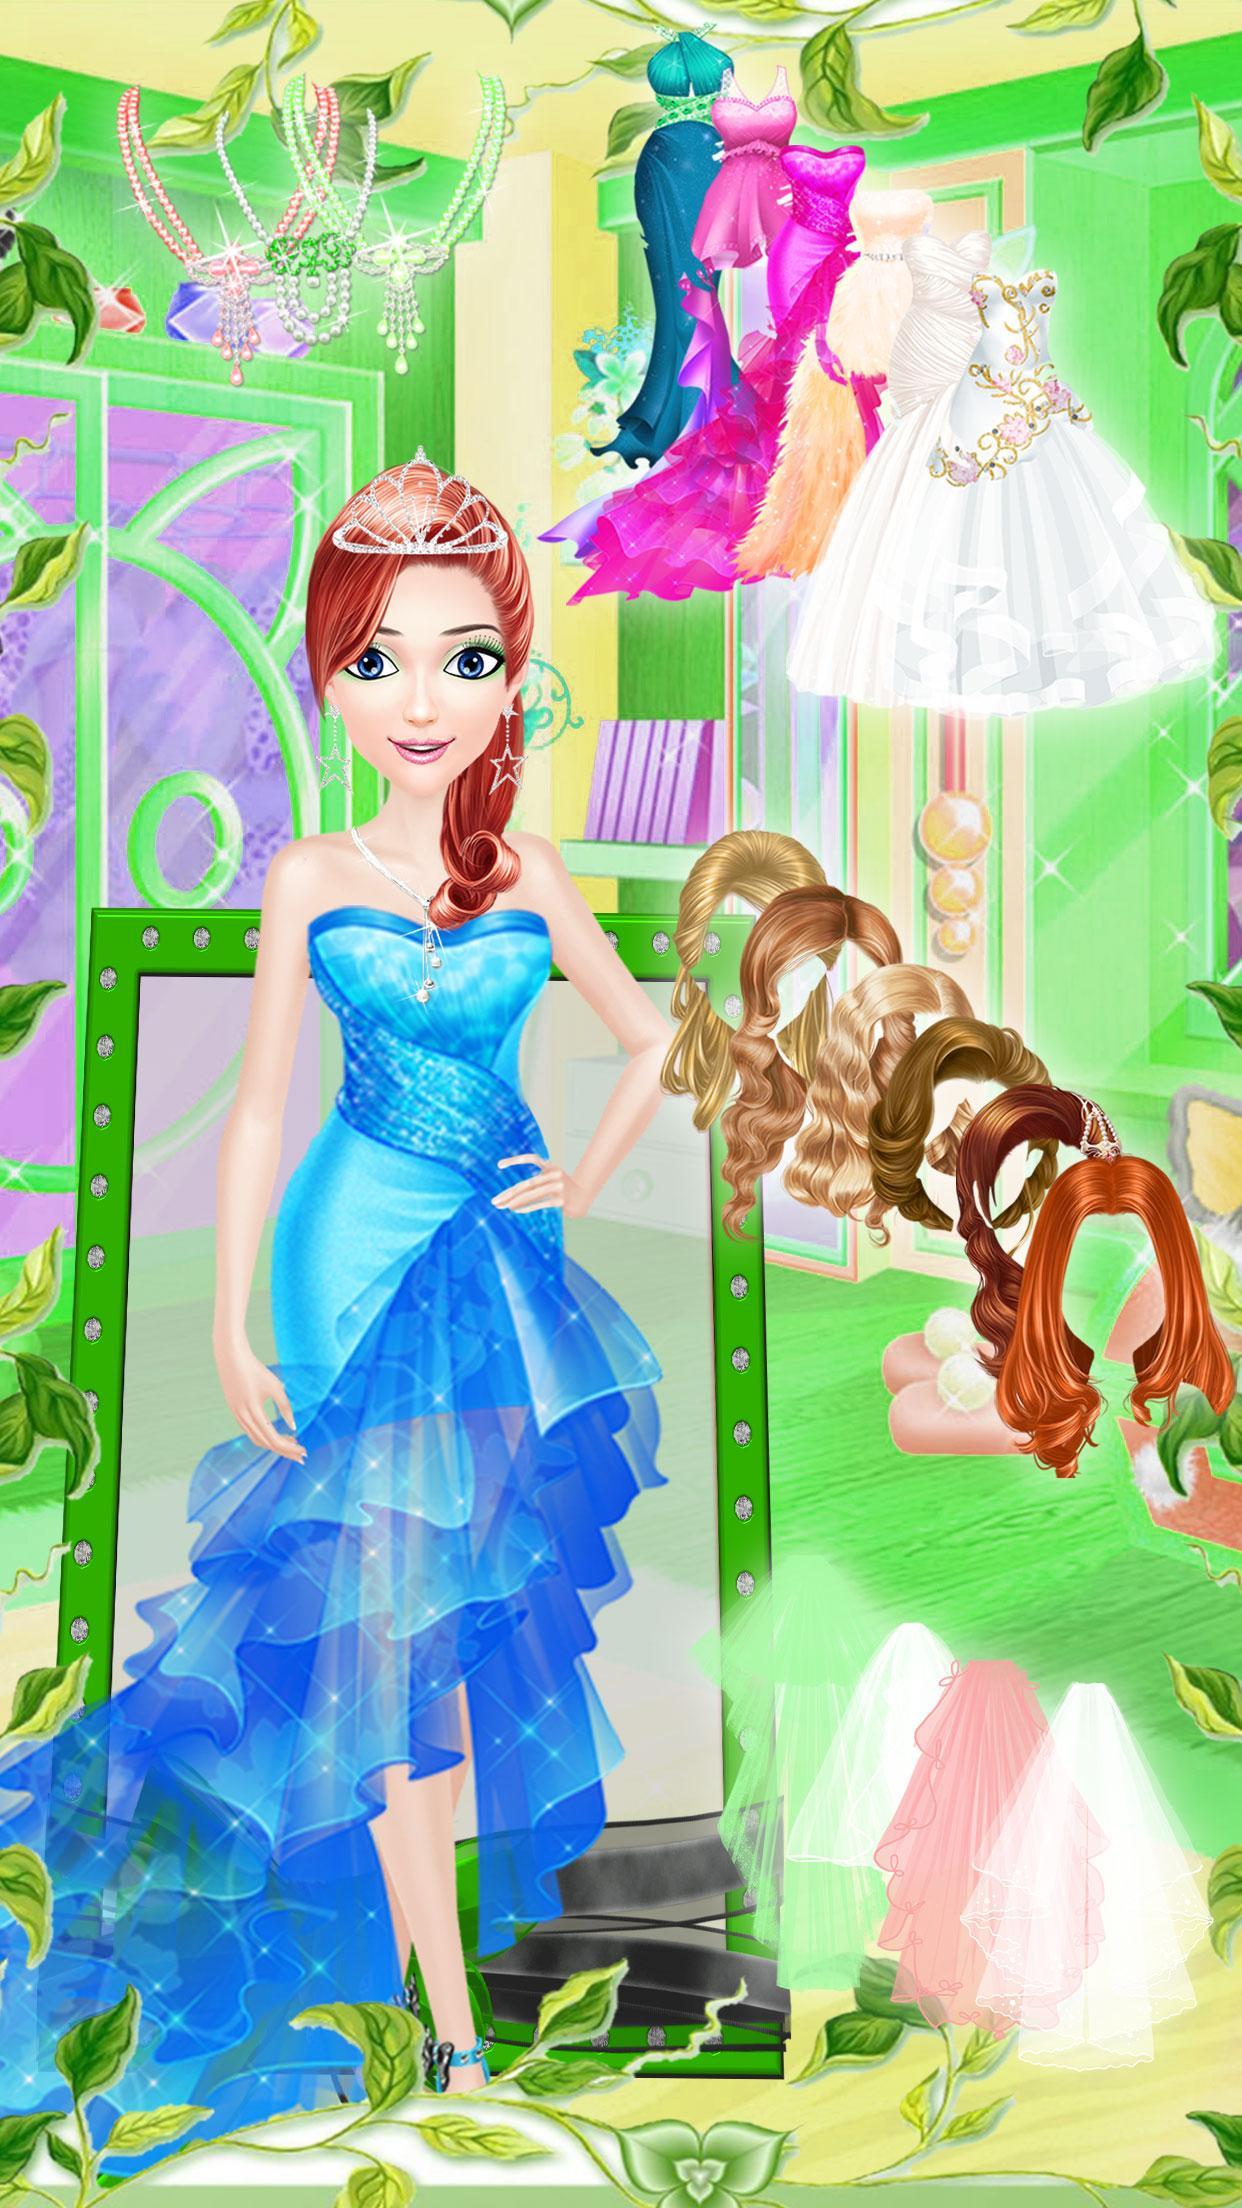 Amazon Princess Party for Android - APK Download